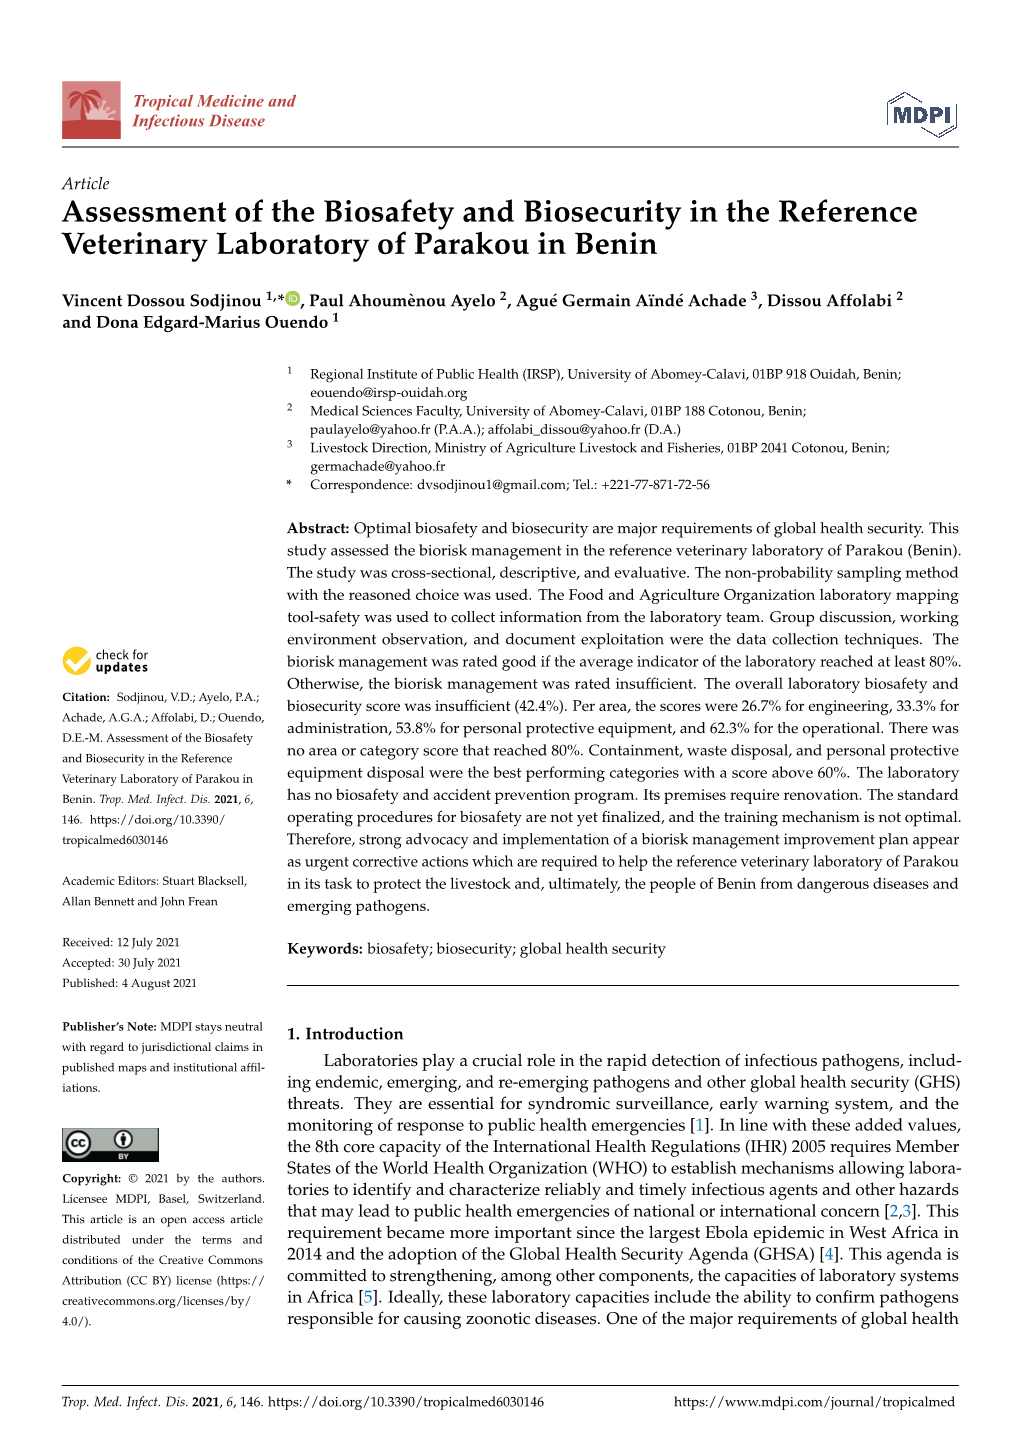 Assessment of the Biosafety and Biosecurity in the Reference Veterinary Laboratory of Parakou in Benin